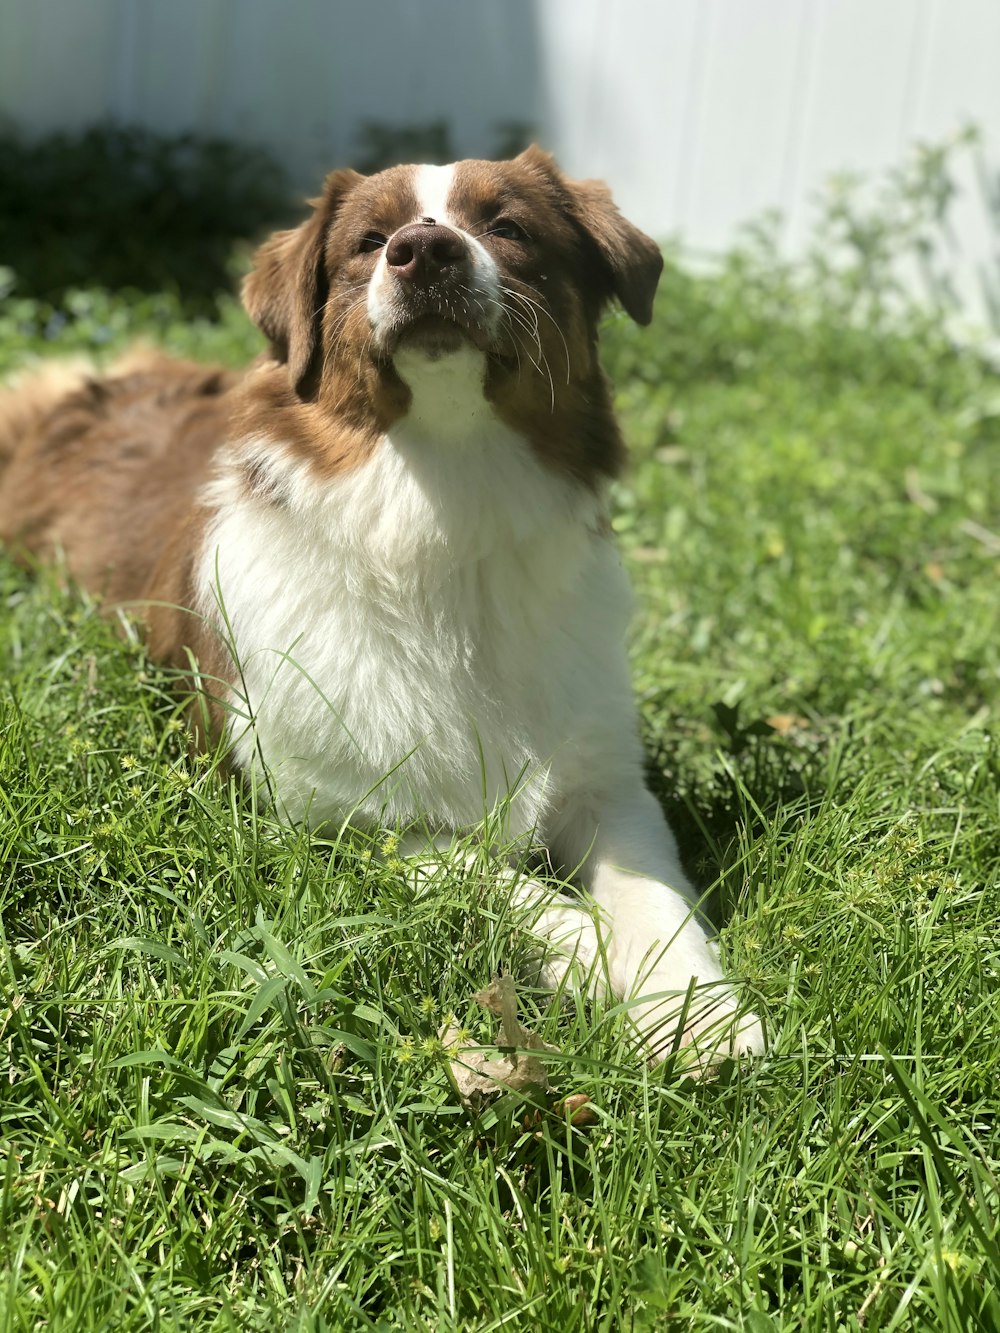 brown and white long coated dog lying on green grass during daytime